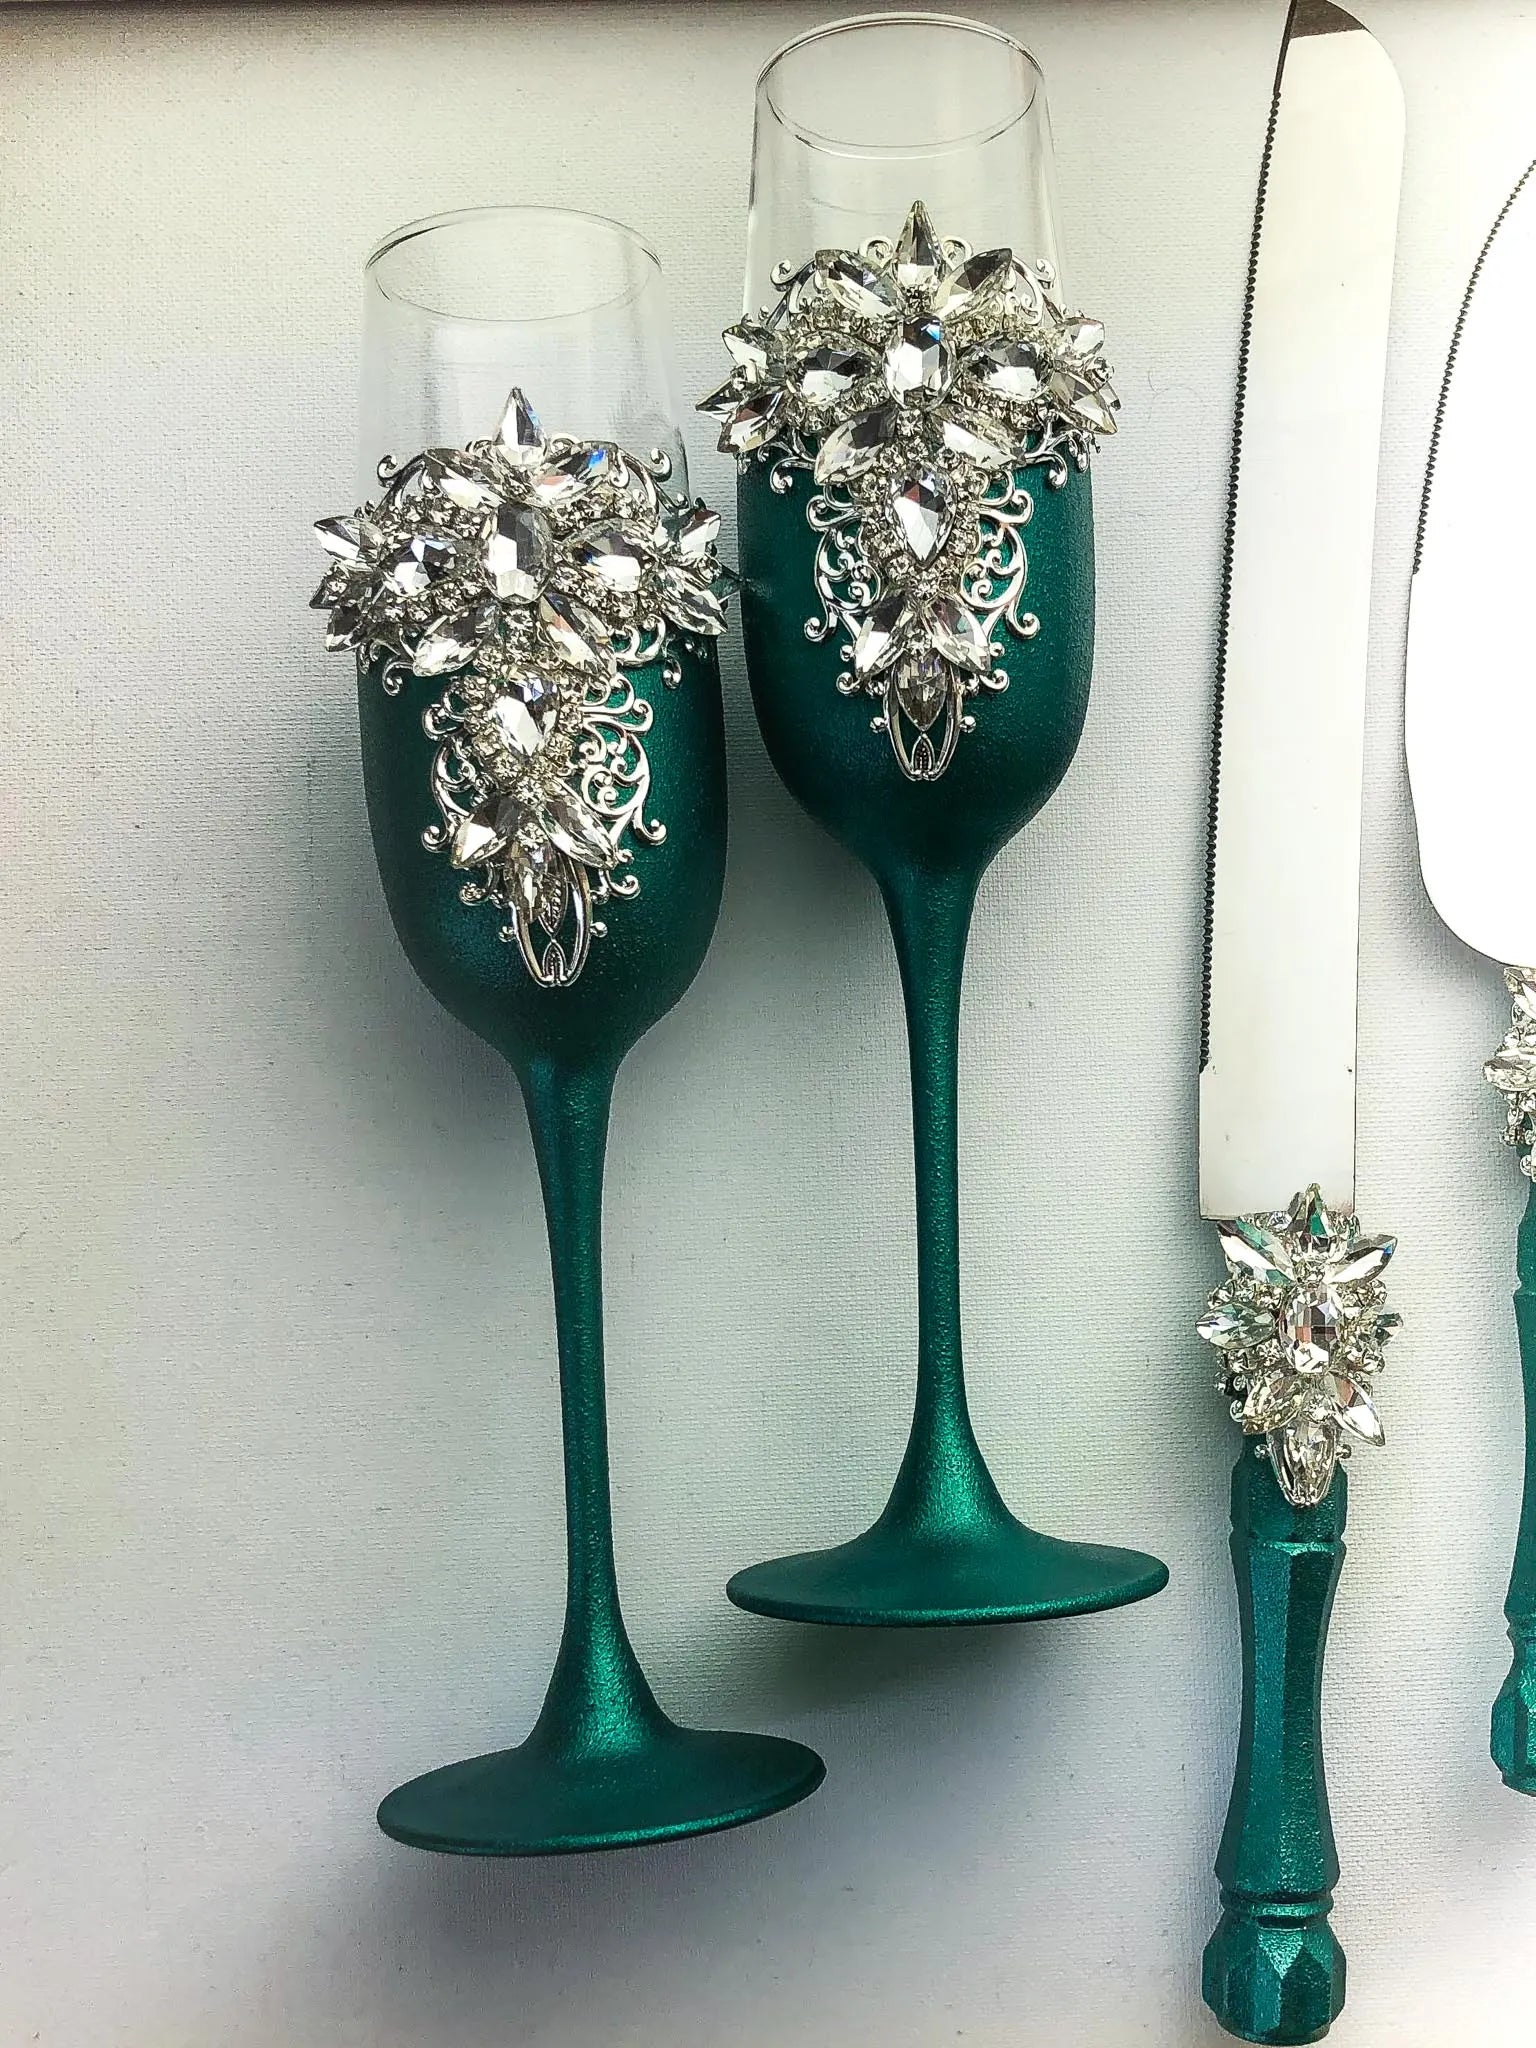 Emerald and silver crystal wedding toasting flutes